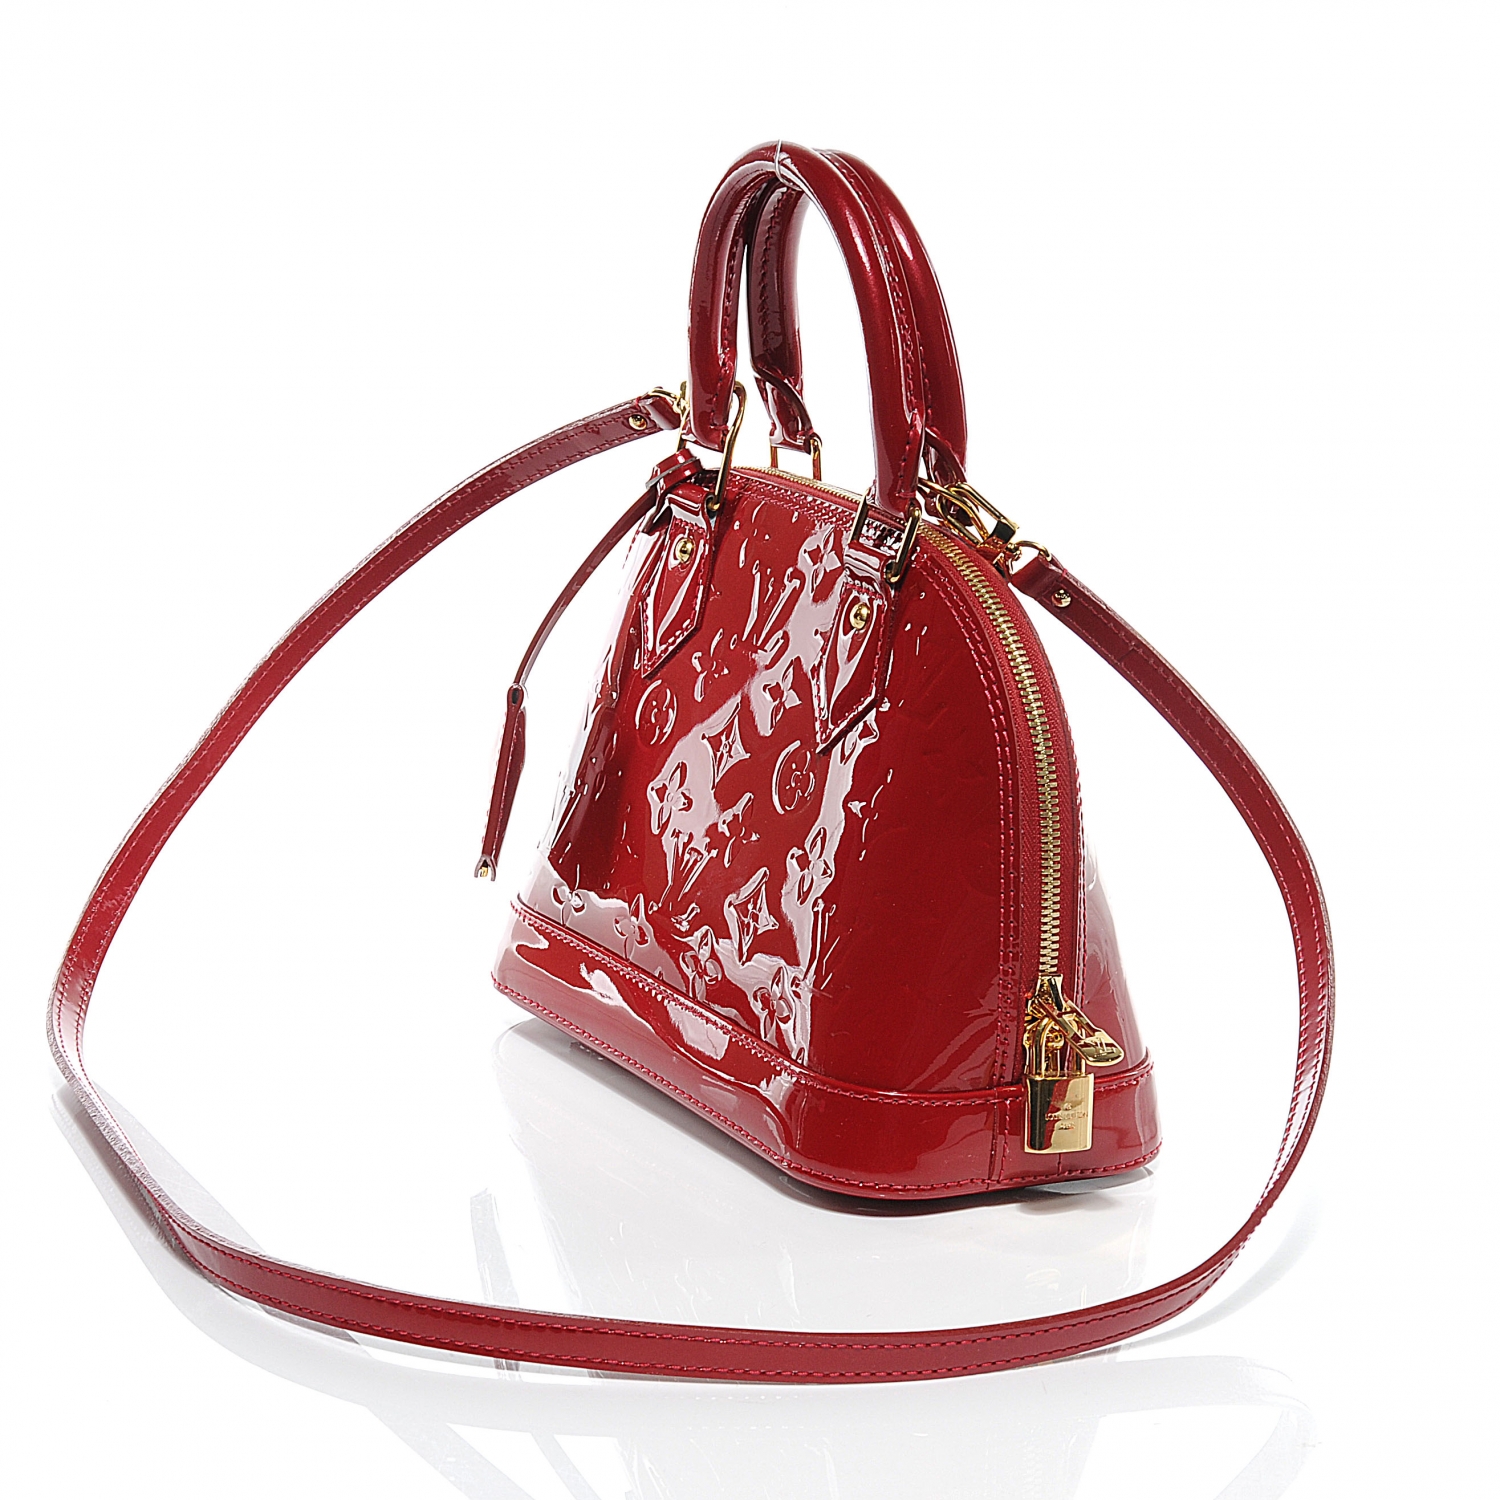 LOUIS VUITTON Vernis Alma MM Pomme D'Amour Red Patent Leather Tote Bag  + Strap